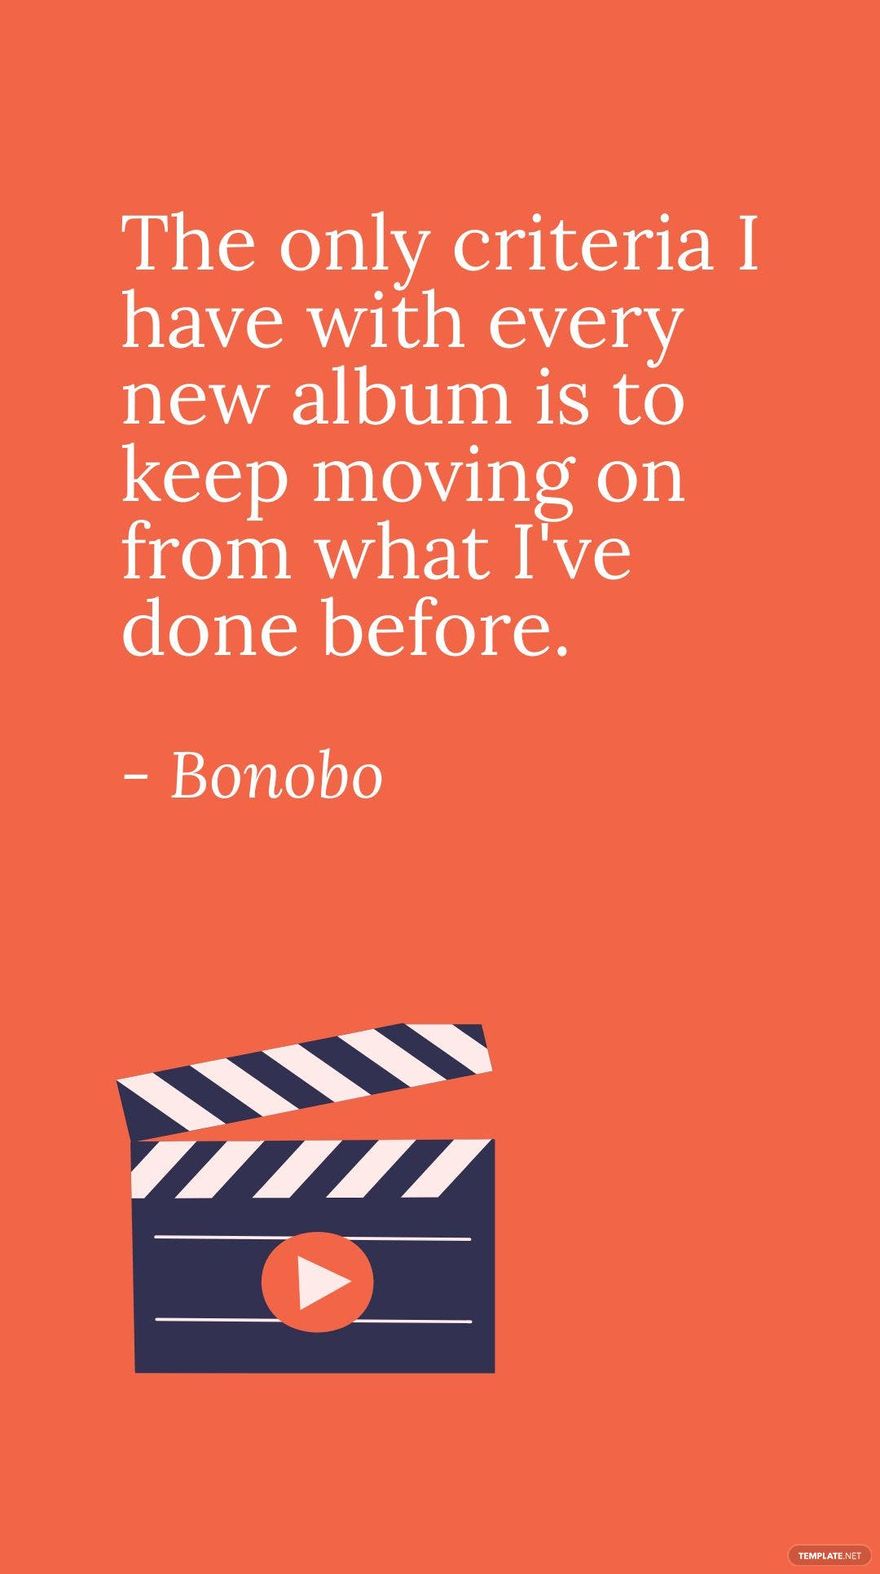 Free Bonobo - The only criteria I have with every new album is to keep moving on from what I've done before.